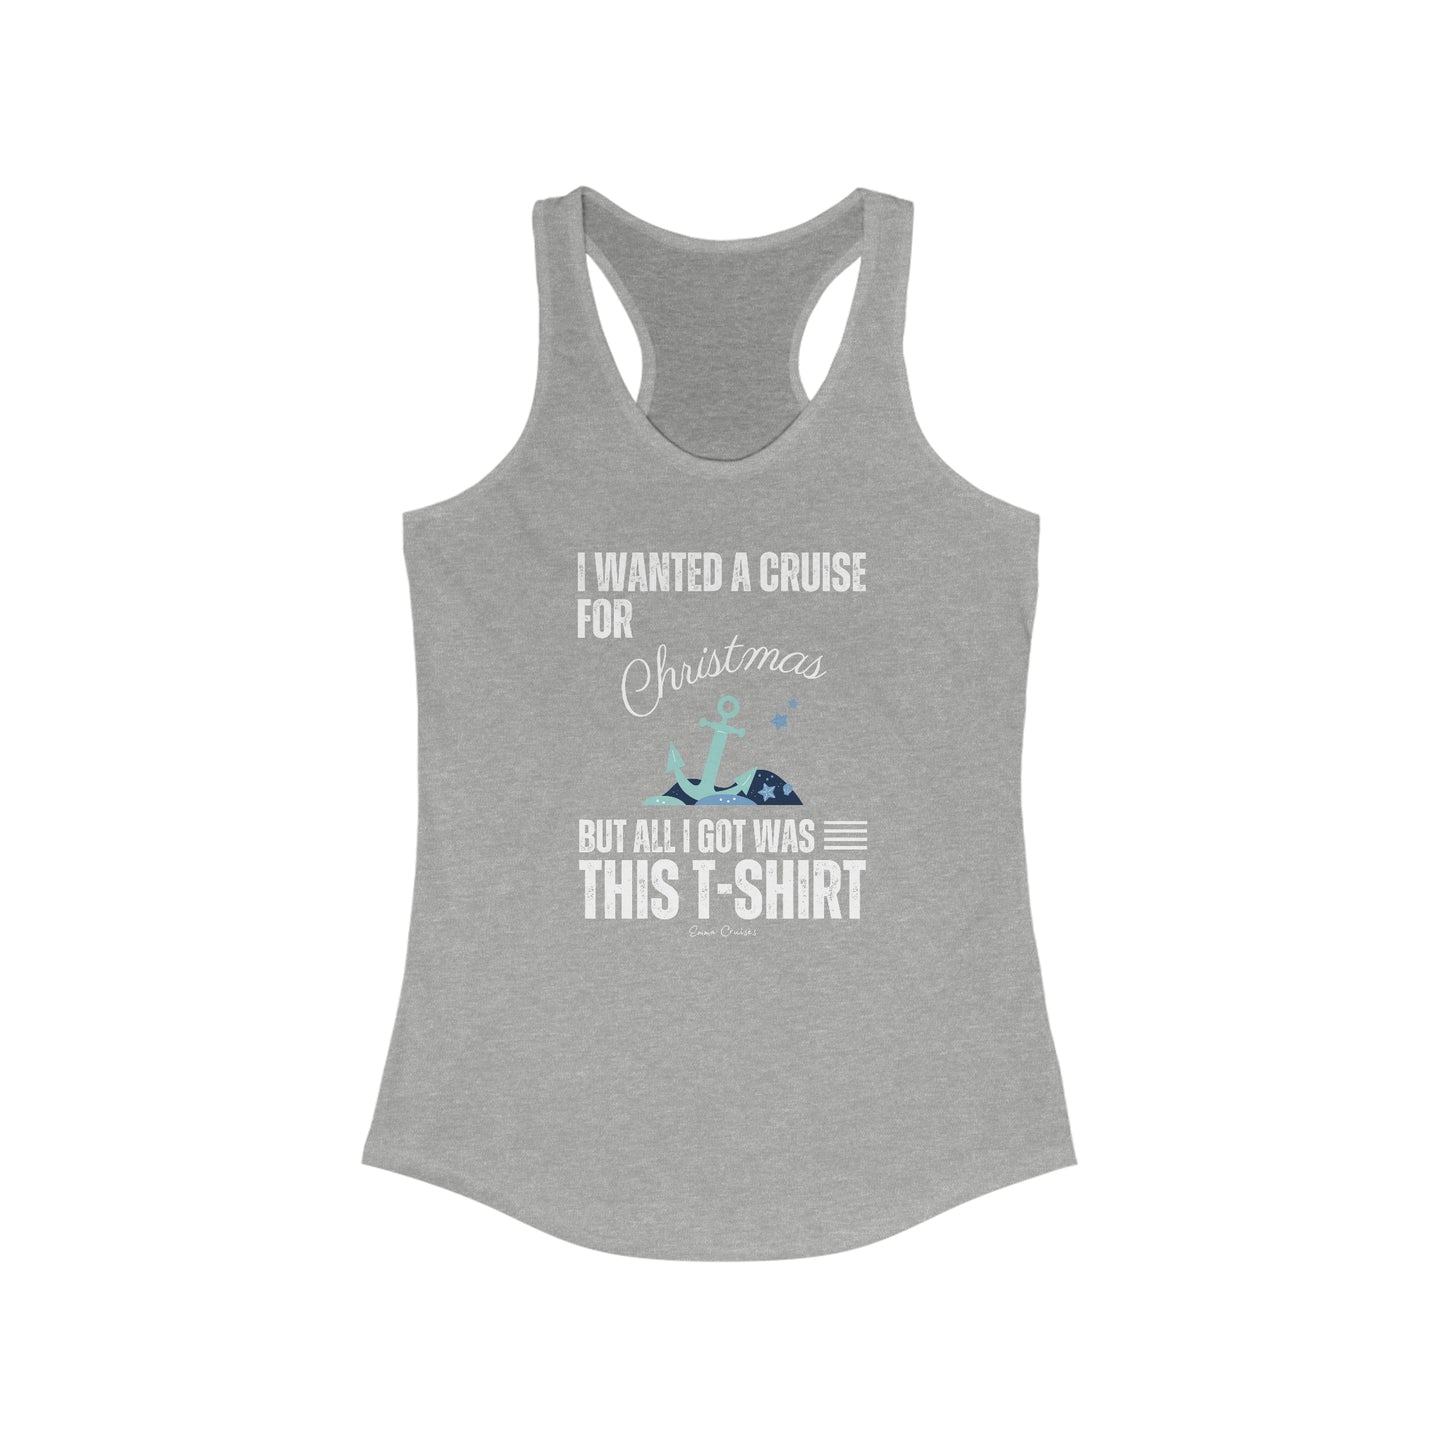 I Wanted a Cruise for Christmas - Tank Top